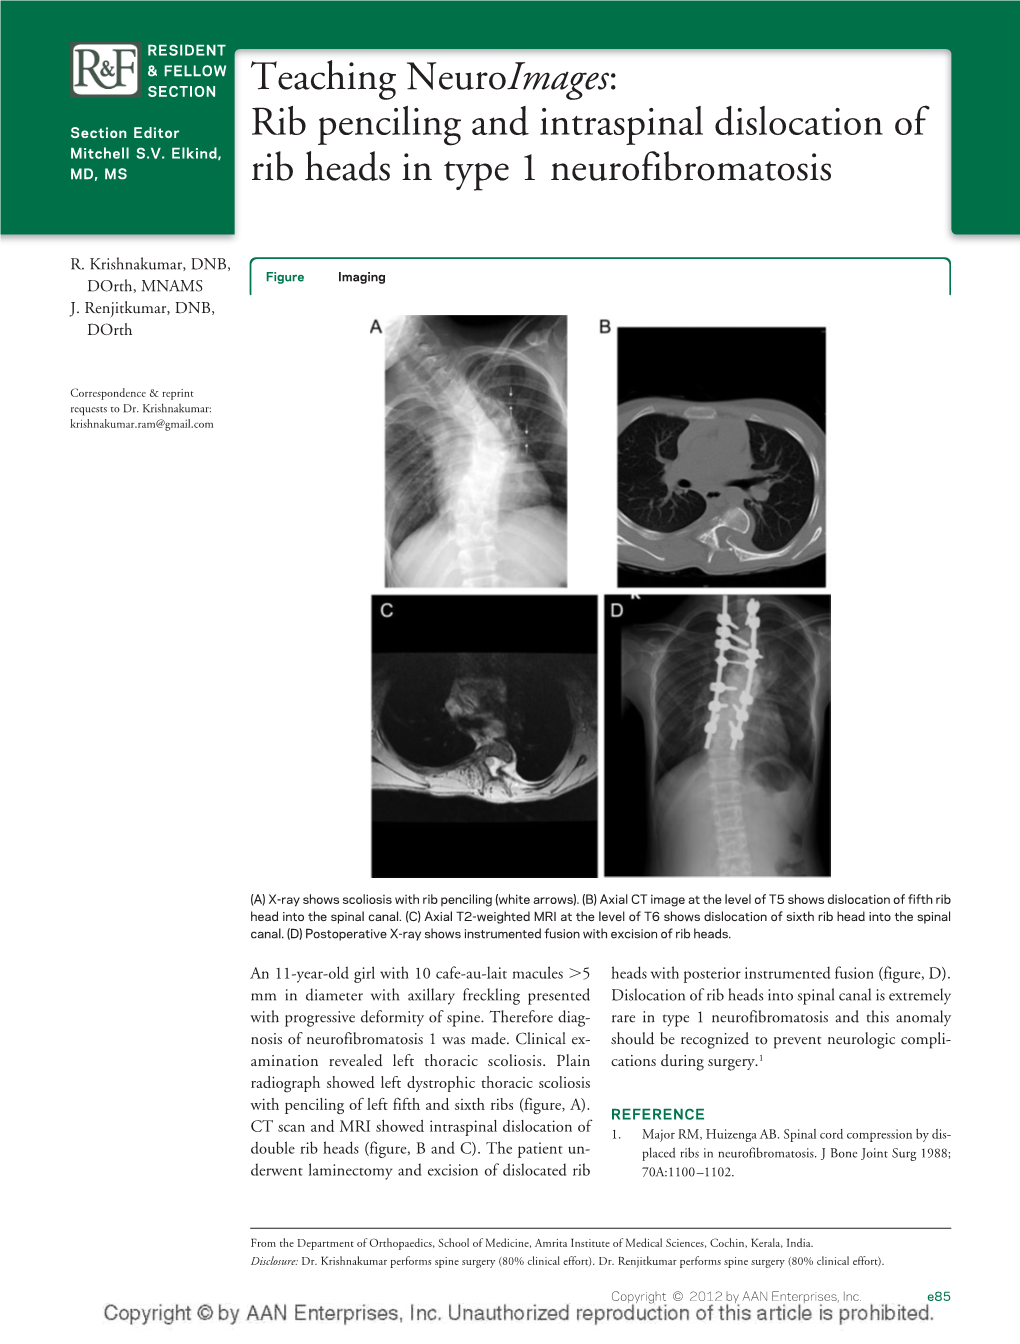 Rib Penciling and Intraspinal Dislocation of Rib Heads in Type 1 Neurofibromatosis R